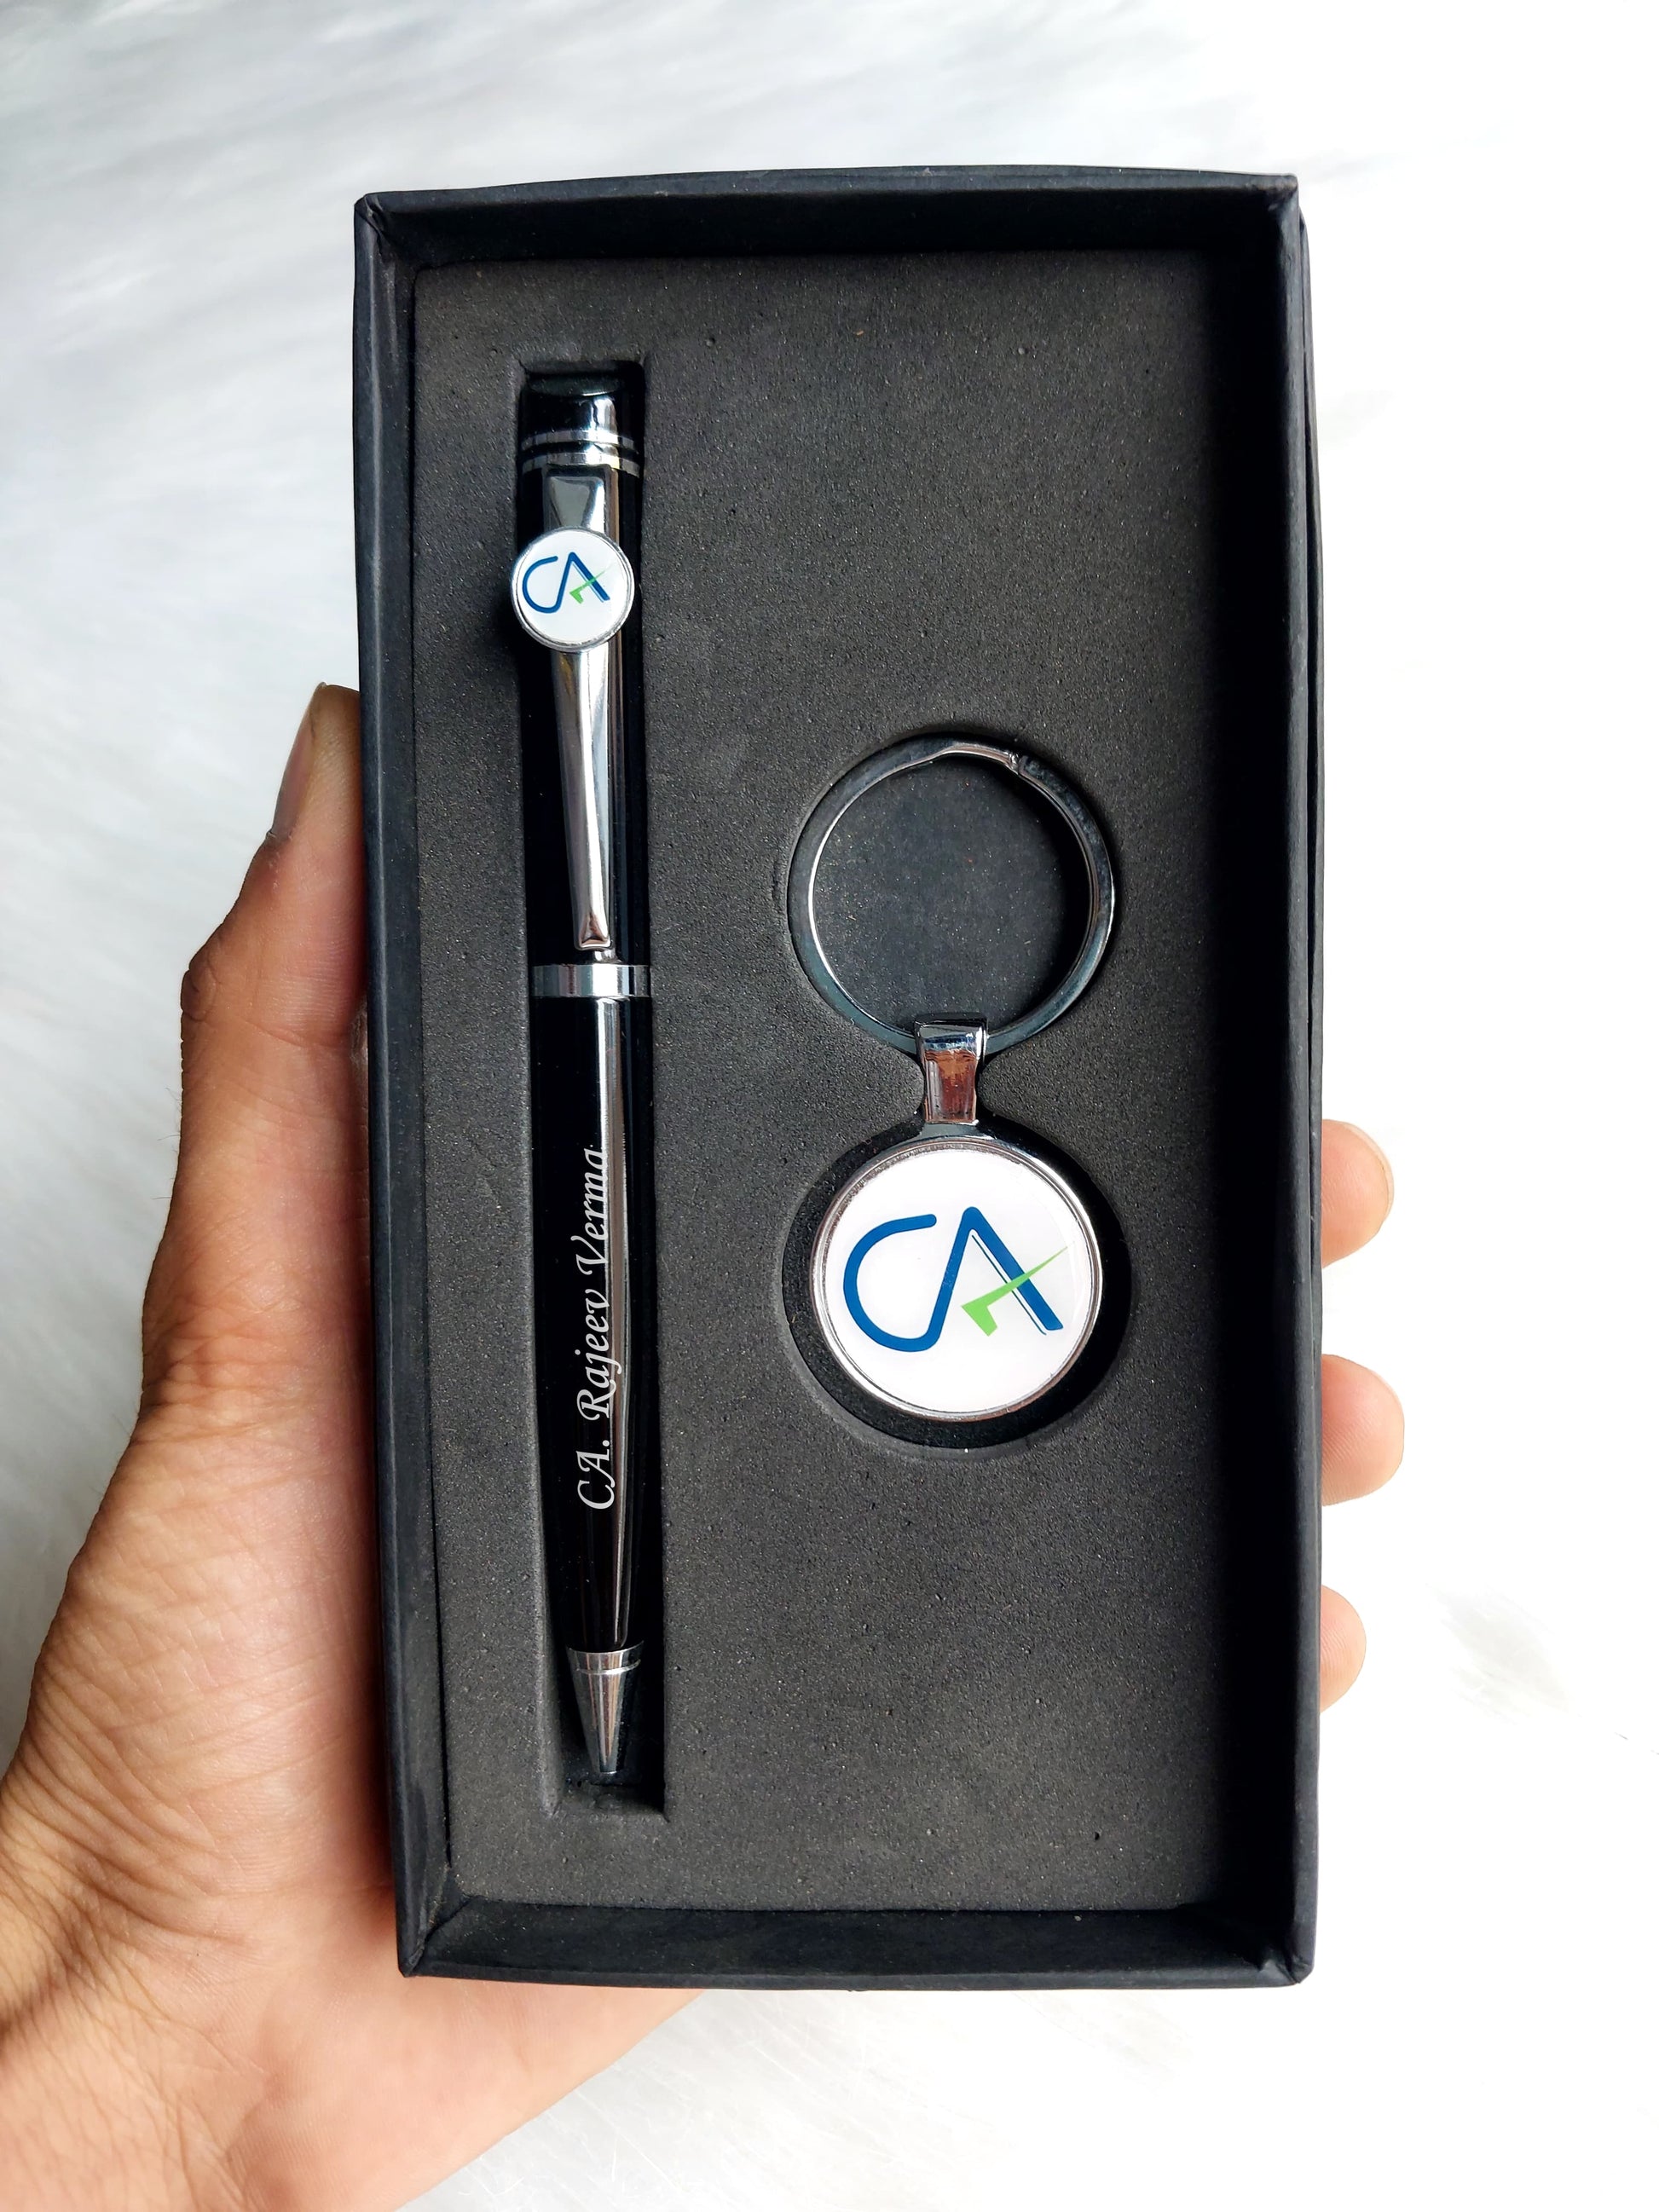 Hand holding Black box with pen and CA keychain inside 